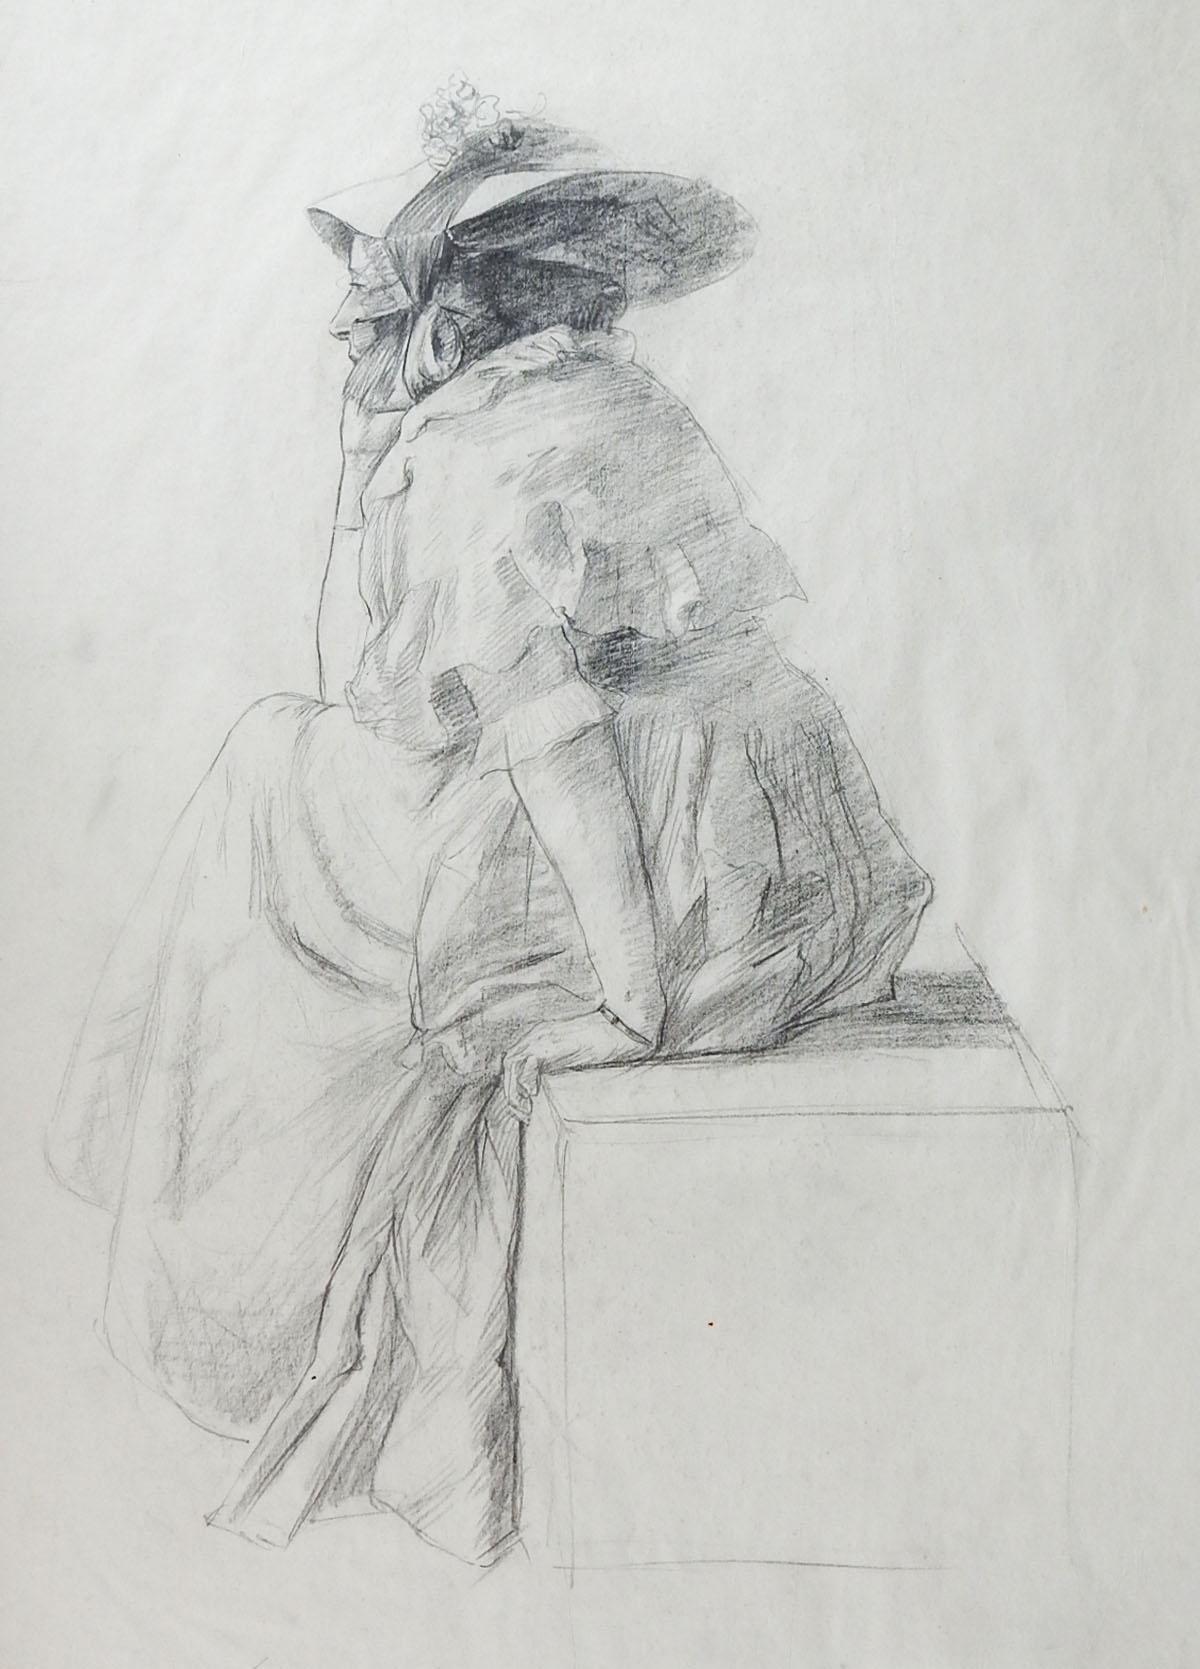 Pencil on thin paper study of seated woman in bonnet.  Late 19th century, unsigned.  Unframed, minor smudging.